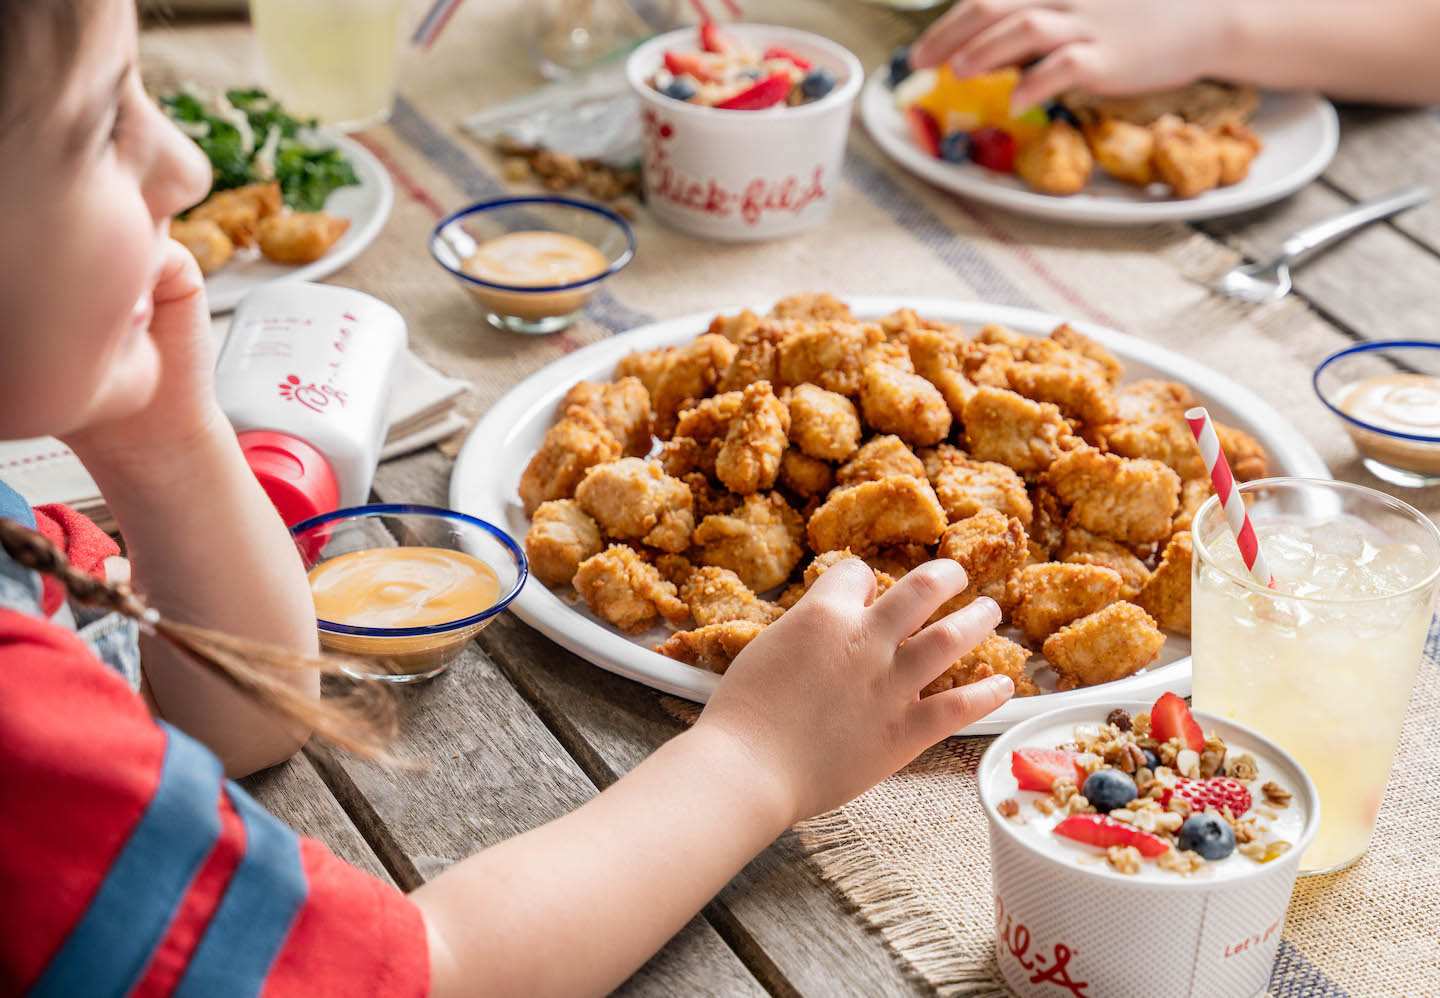 Can We Guess Your Age and Gender Based on Your Chick-fil-A Order? Chick-fil-A nuggets